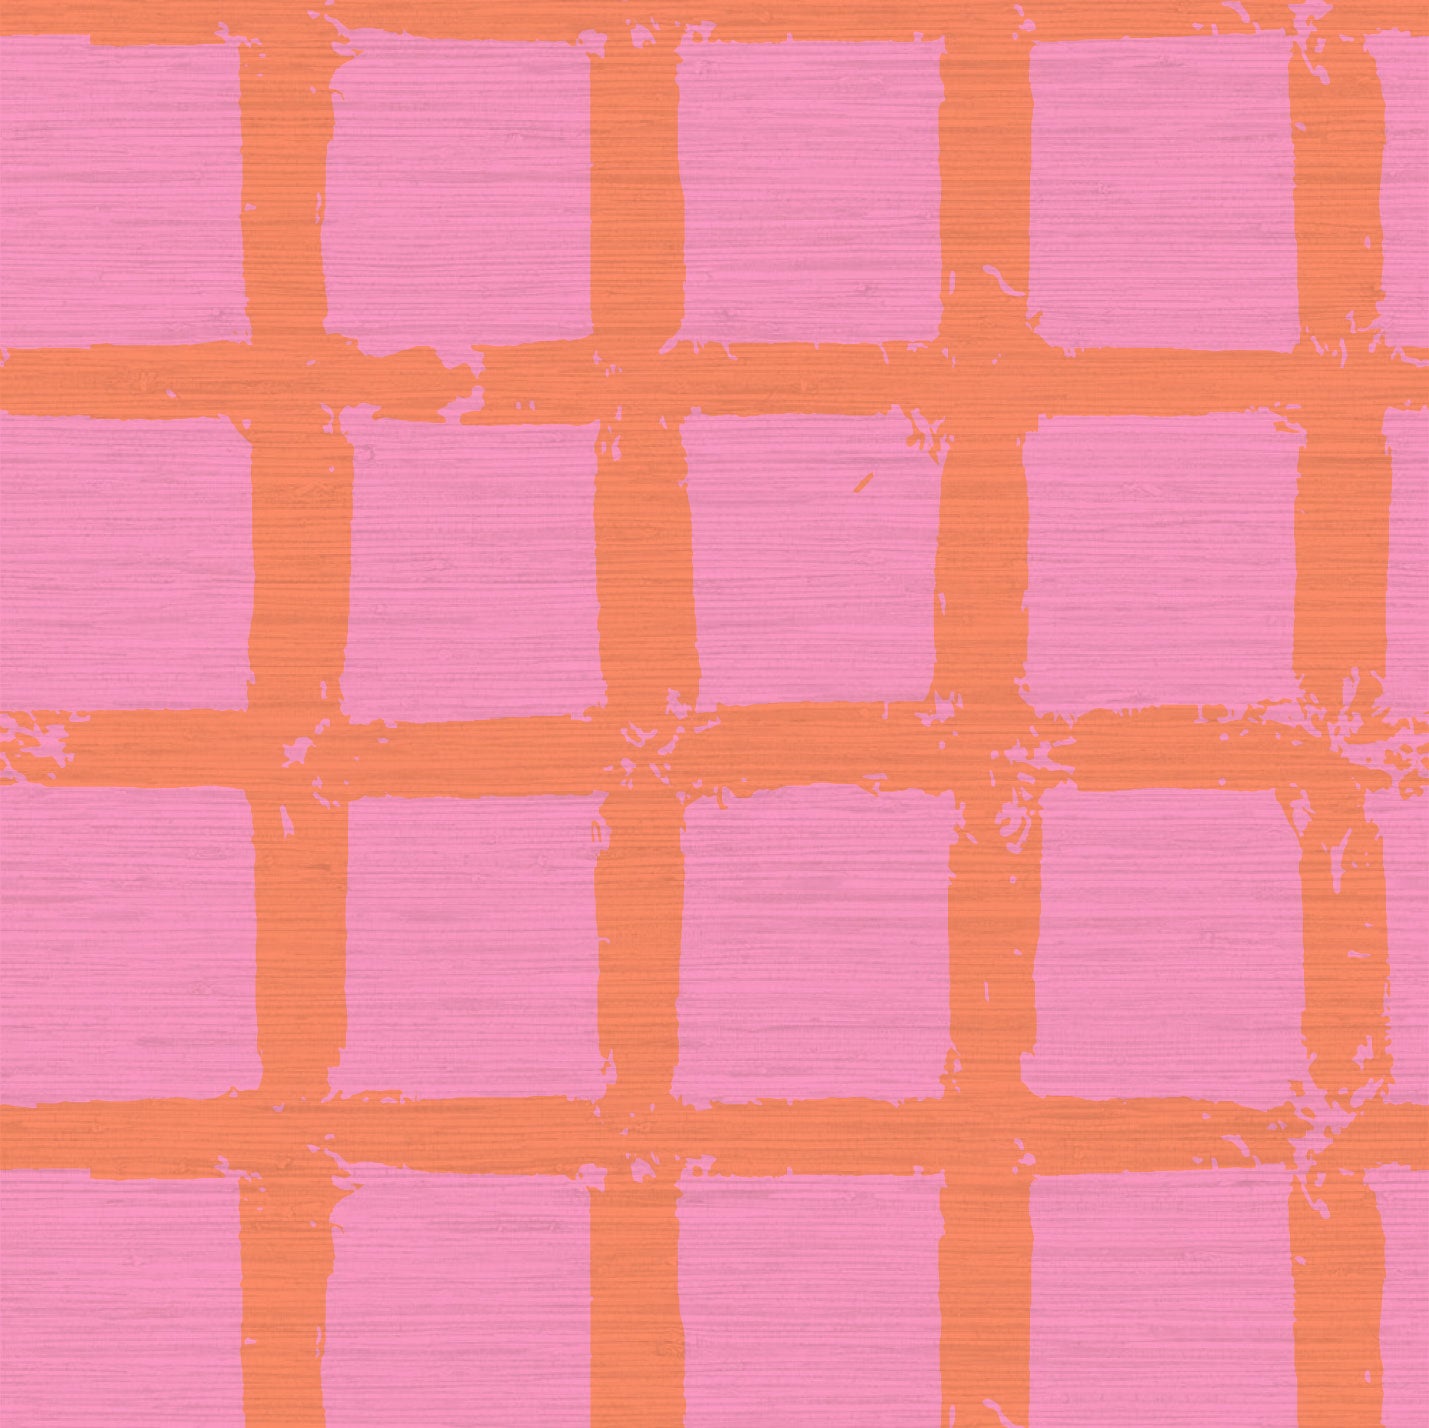 Grasscloth wallpaper in hand painted square pattern emulating window panes in an oversized plaid layout with a french blue base on cream printGrasscloth wallpaper Natural Textured Eco-Friendly Non-toxic High-quality Sustainable Interior Design Bold Custom Tailor-made Retro chic Bold coastal pink orange coral red hot pink